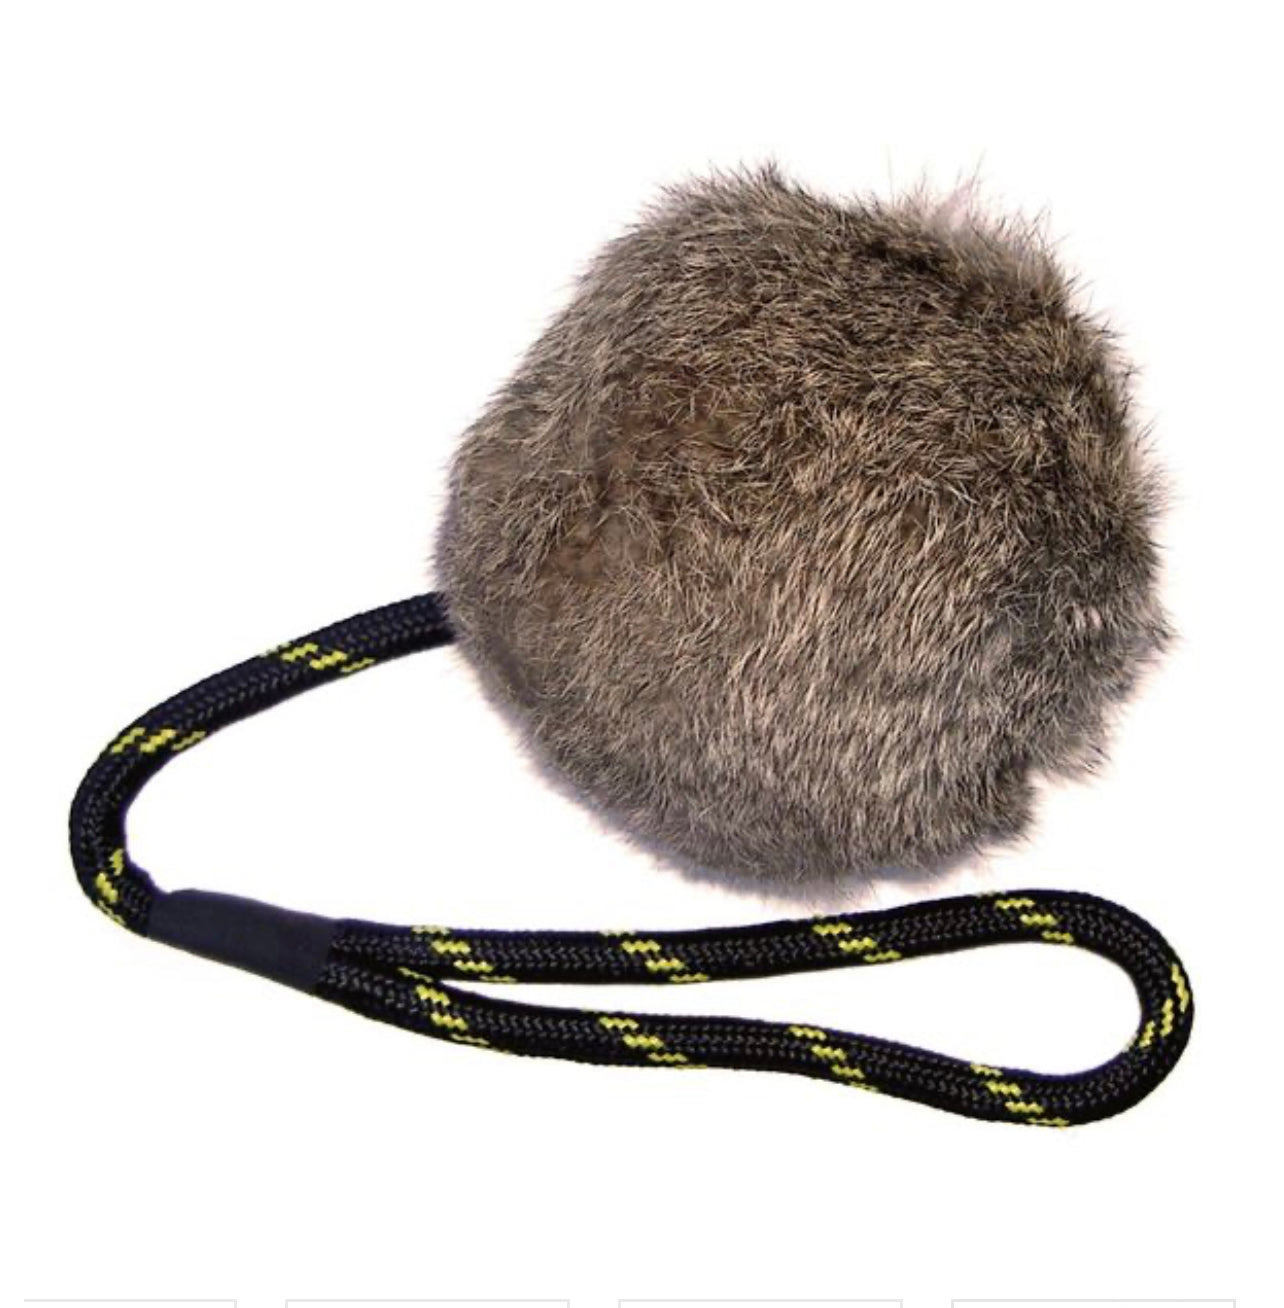 BG Rabbit Distance marking ball with rope